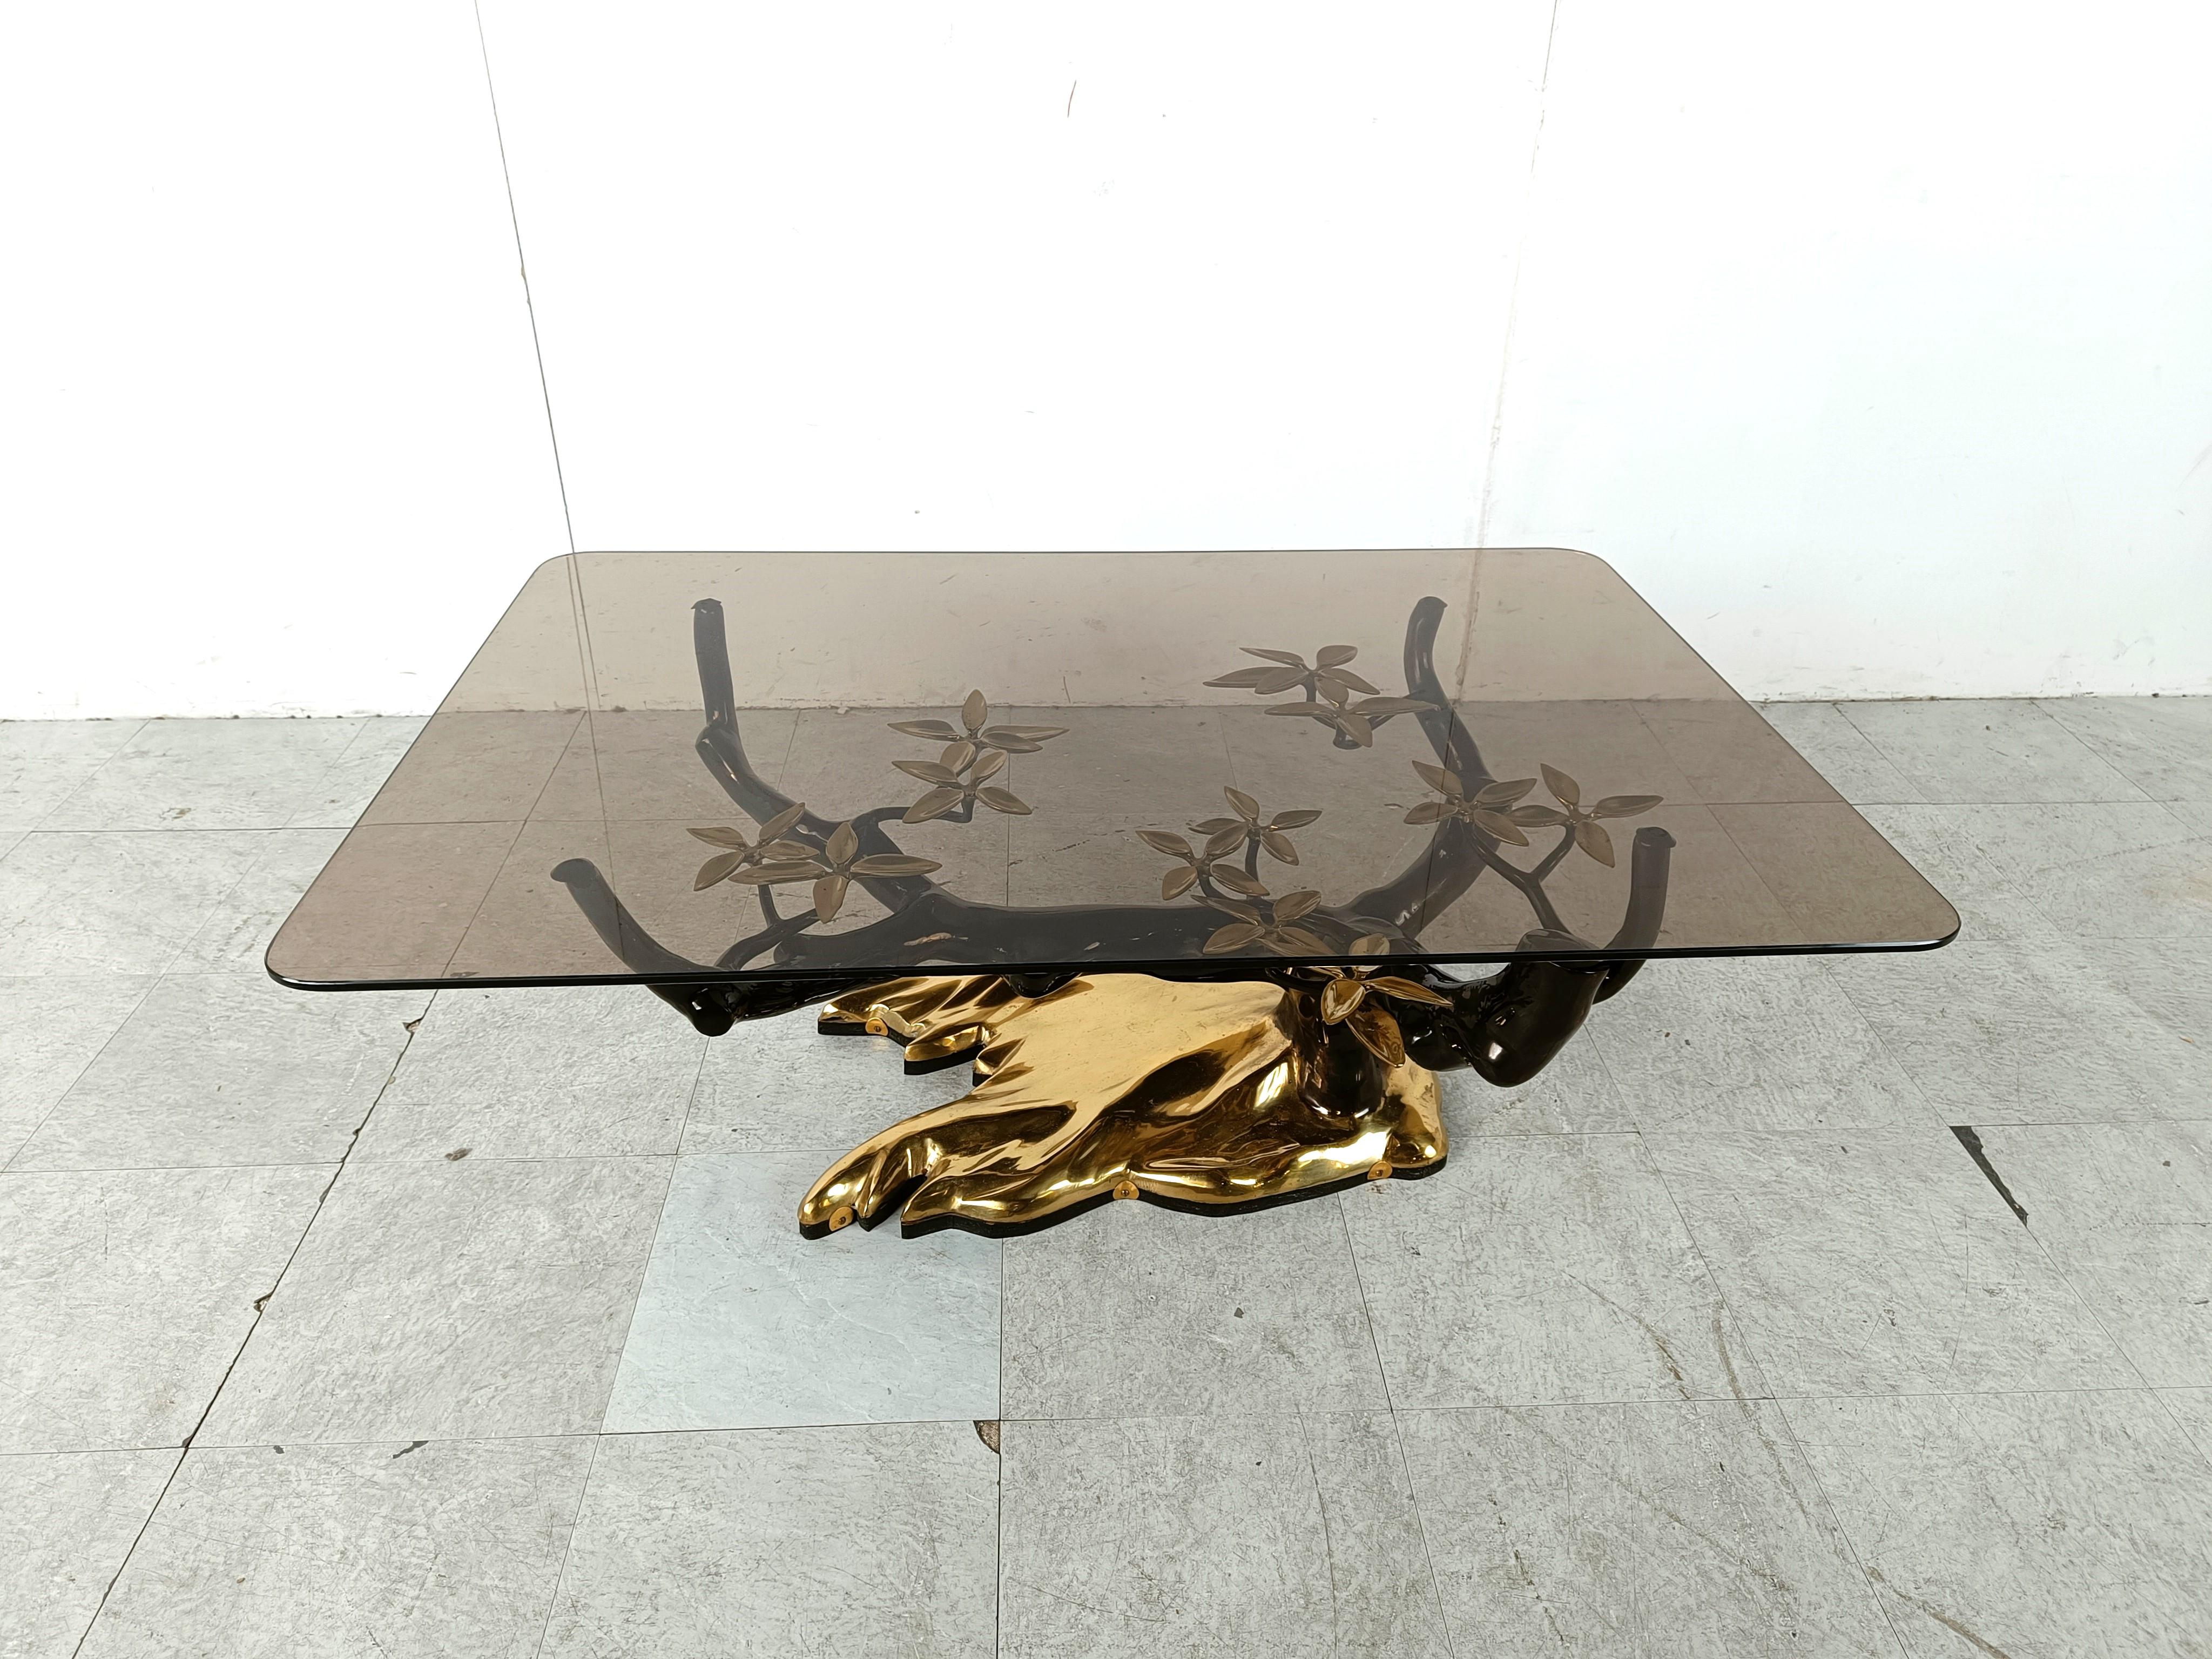 Bronze bonsai coffee table by Willy Daro.

Beautifully manufactured sculpture, comes with a rectangular smoked glass top.

Good overall condition

1970s - Belgium

Dimensions:
Height: 44cm/17.32